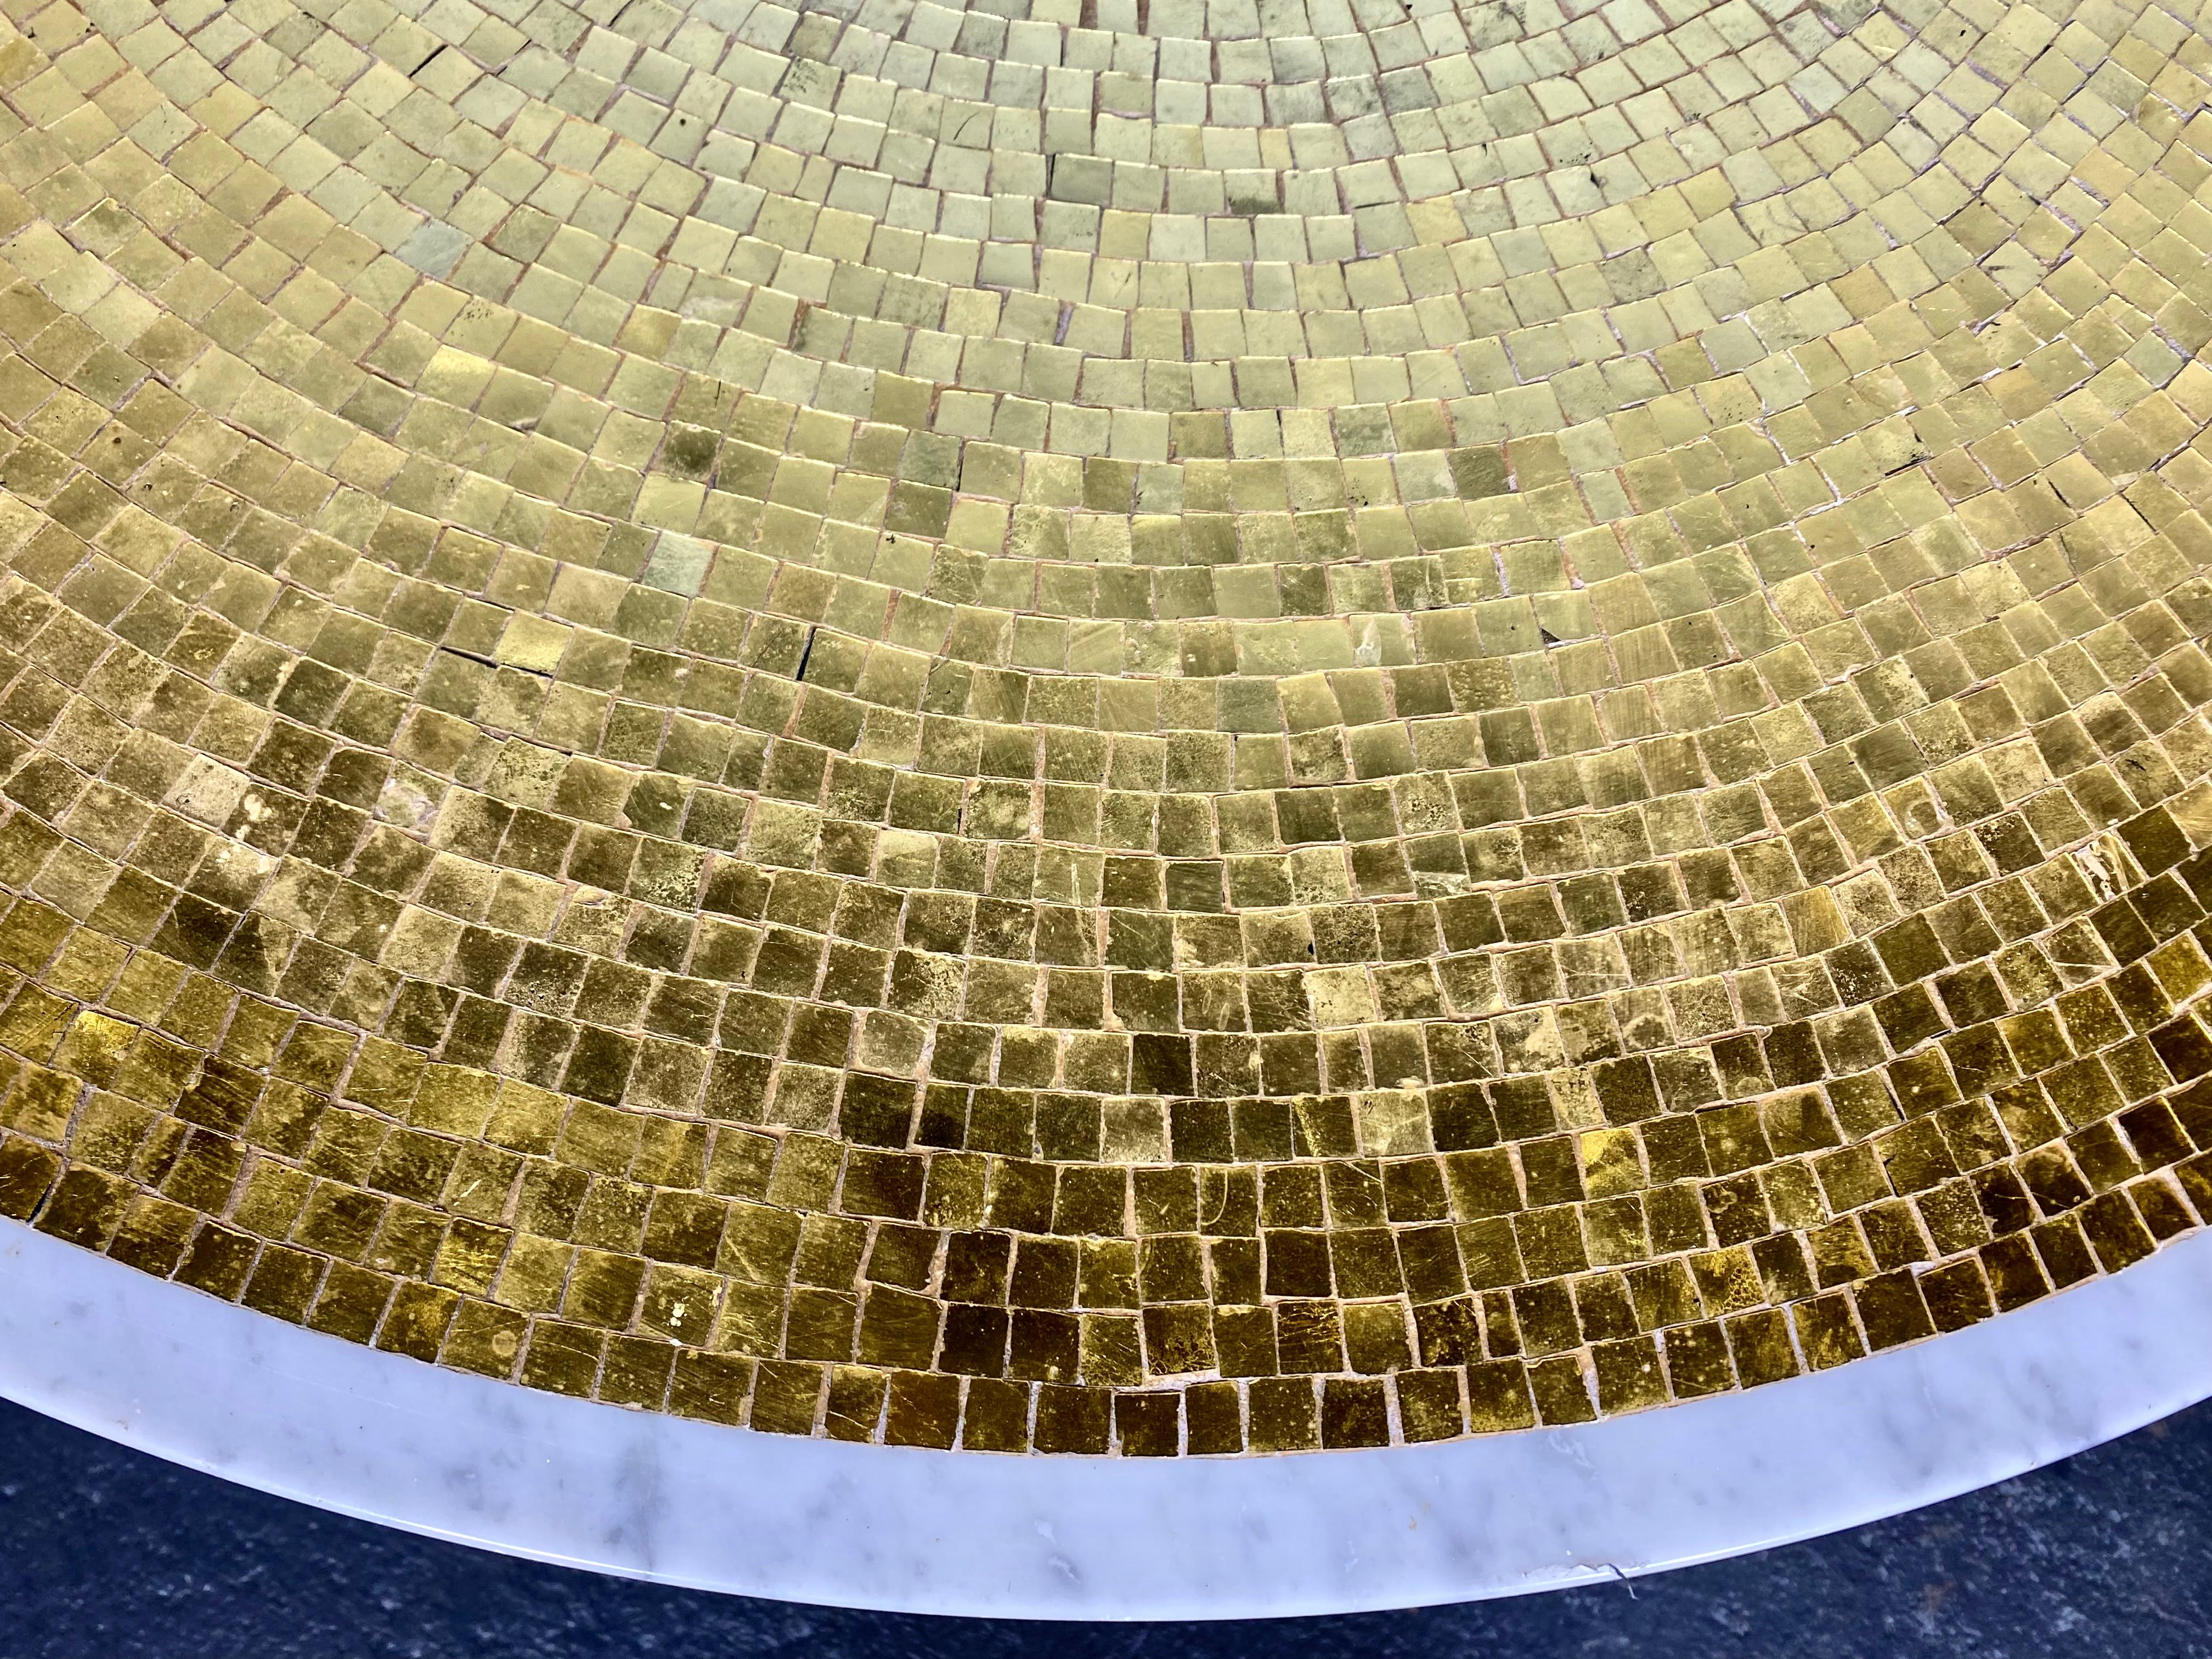 Stunning Micro Mosaic / Spalti Glass Tile and Marble Gold Guilt Iron Base Table / Made in Italy,, Superior quality. Hand delivery avail to New York City or anywhere en route from Buffalo NY